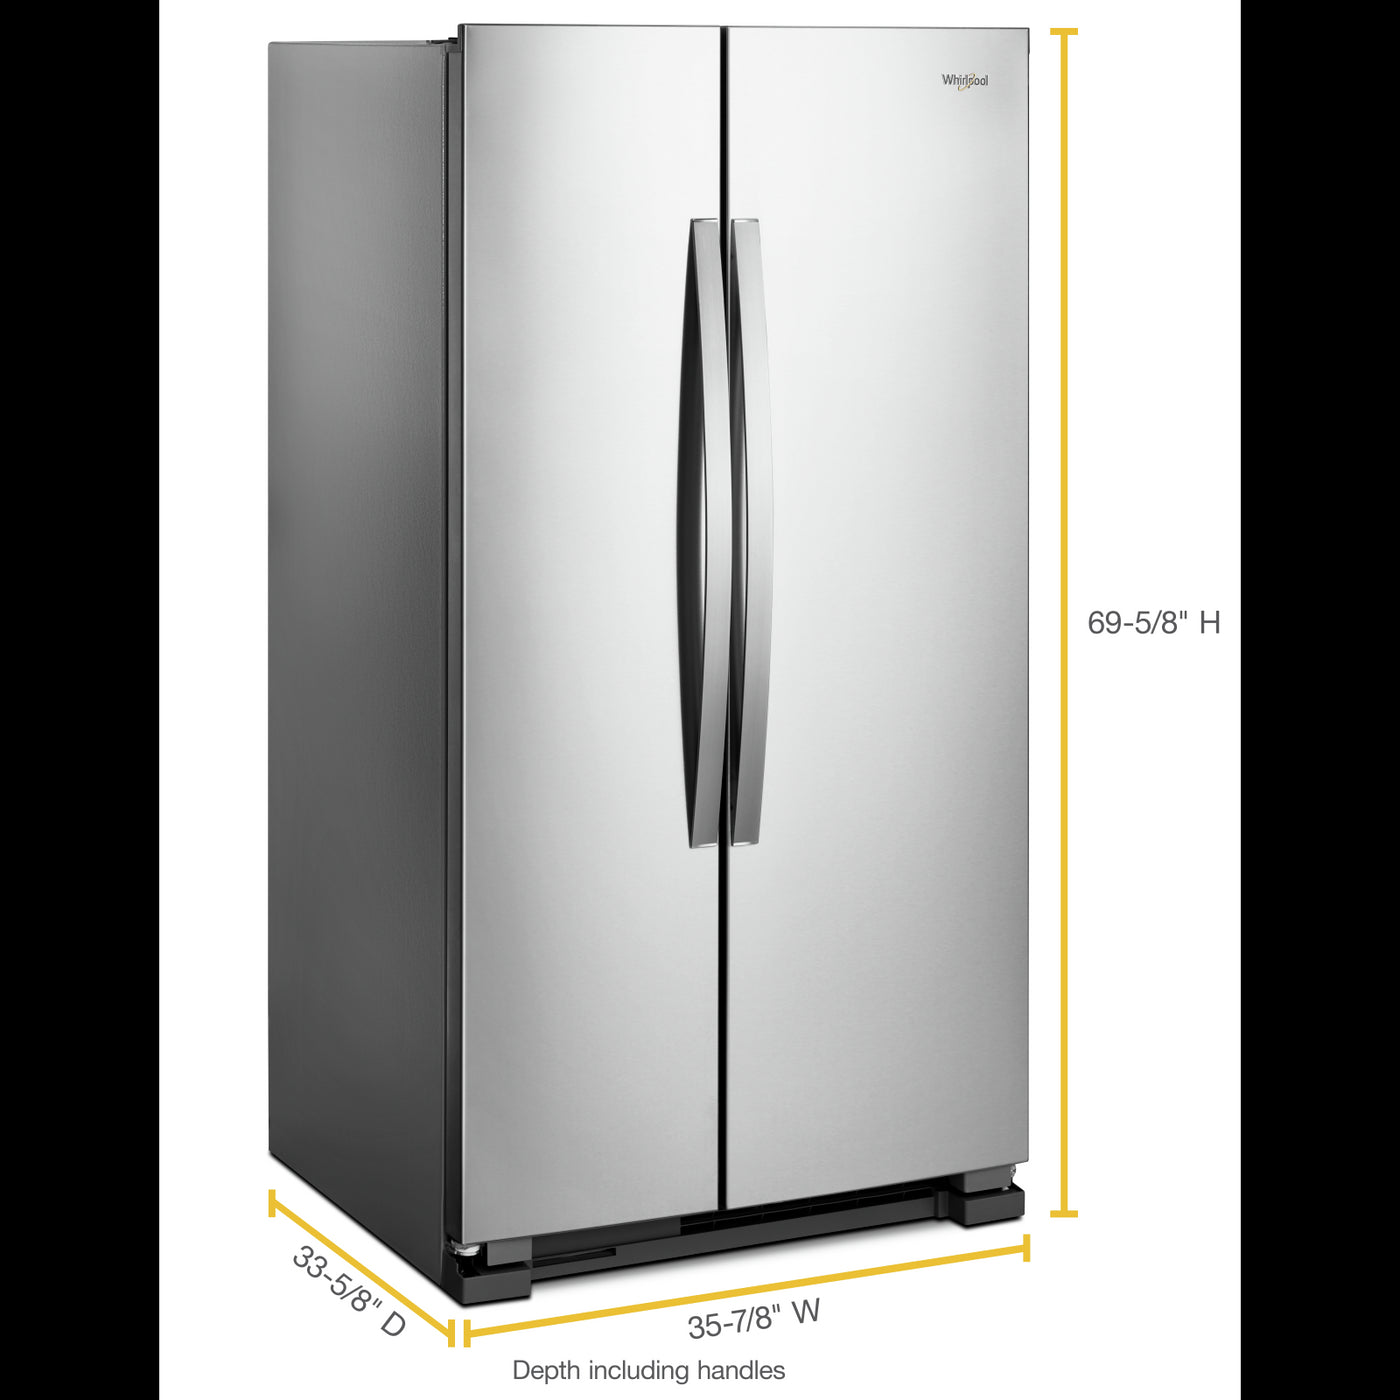 Whirlpool Monochromatic Stainless Steel Side-by-Side Refrigerator (25 Cu. Ft.) - WRS315SNHM